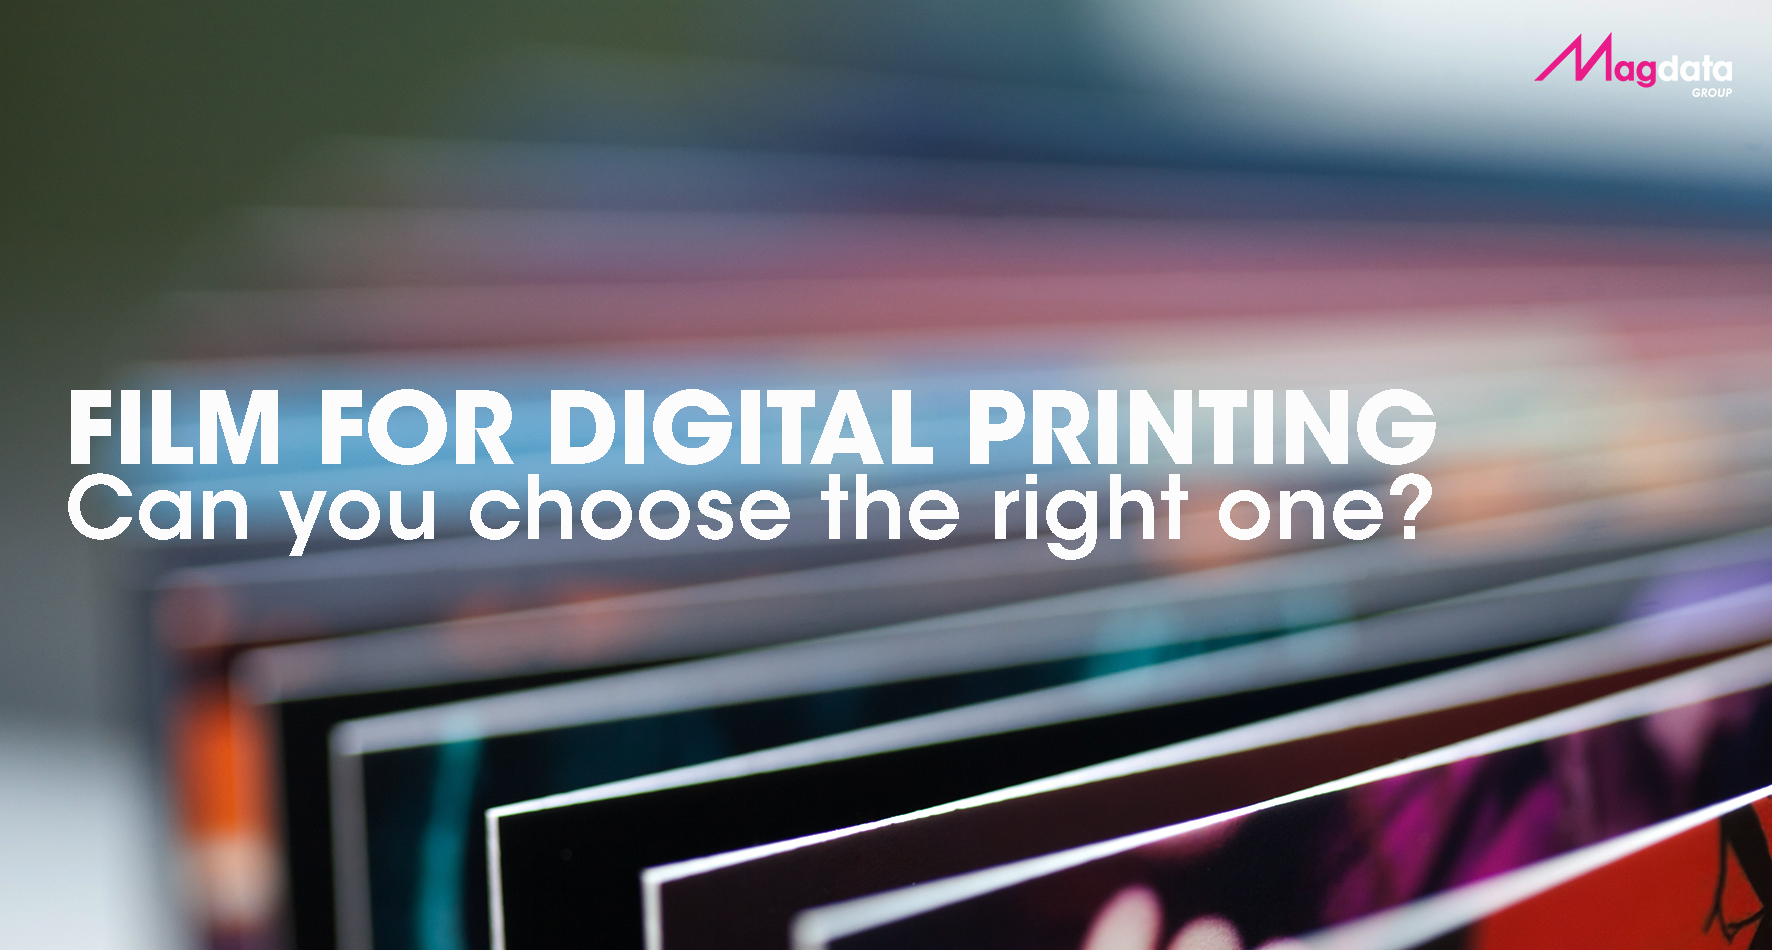 The right film for your digital printing technology